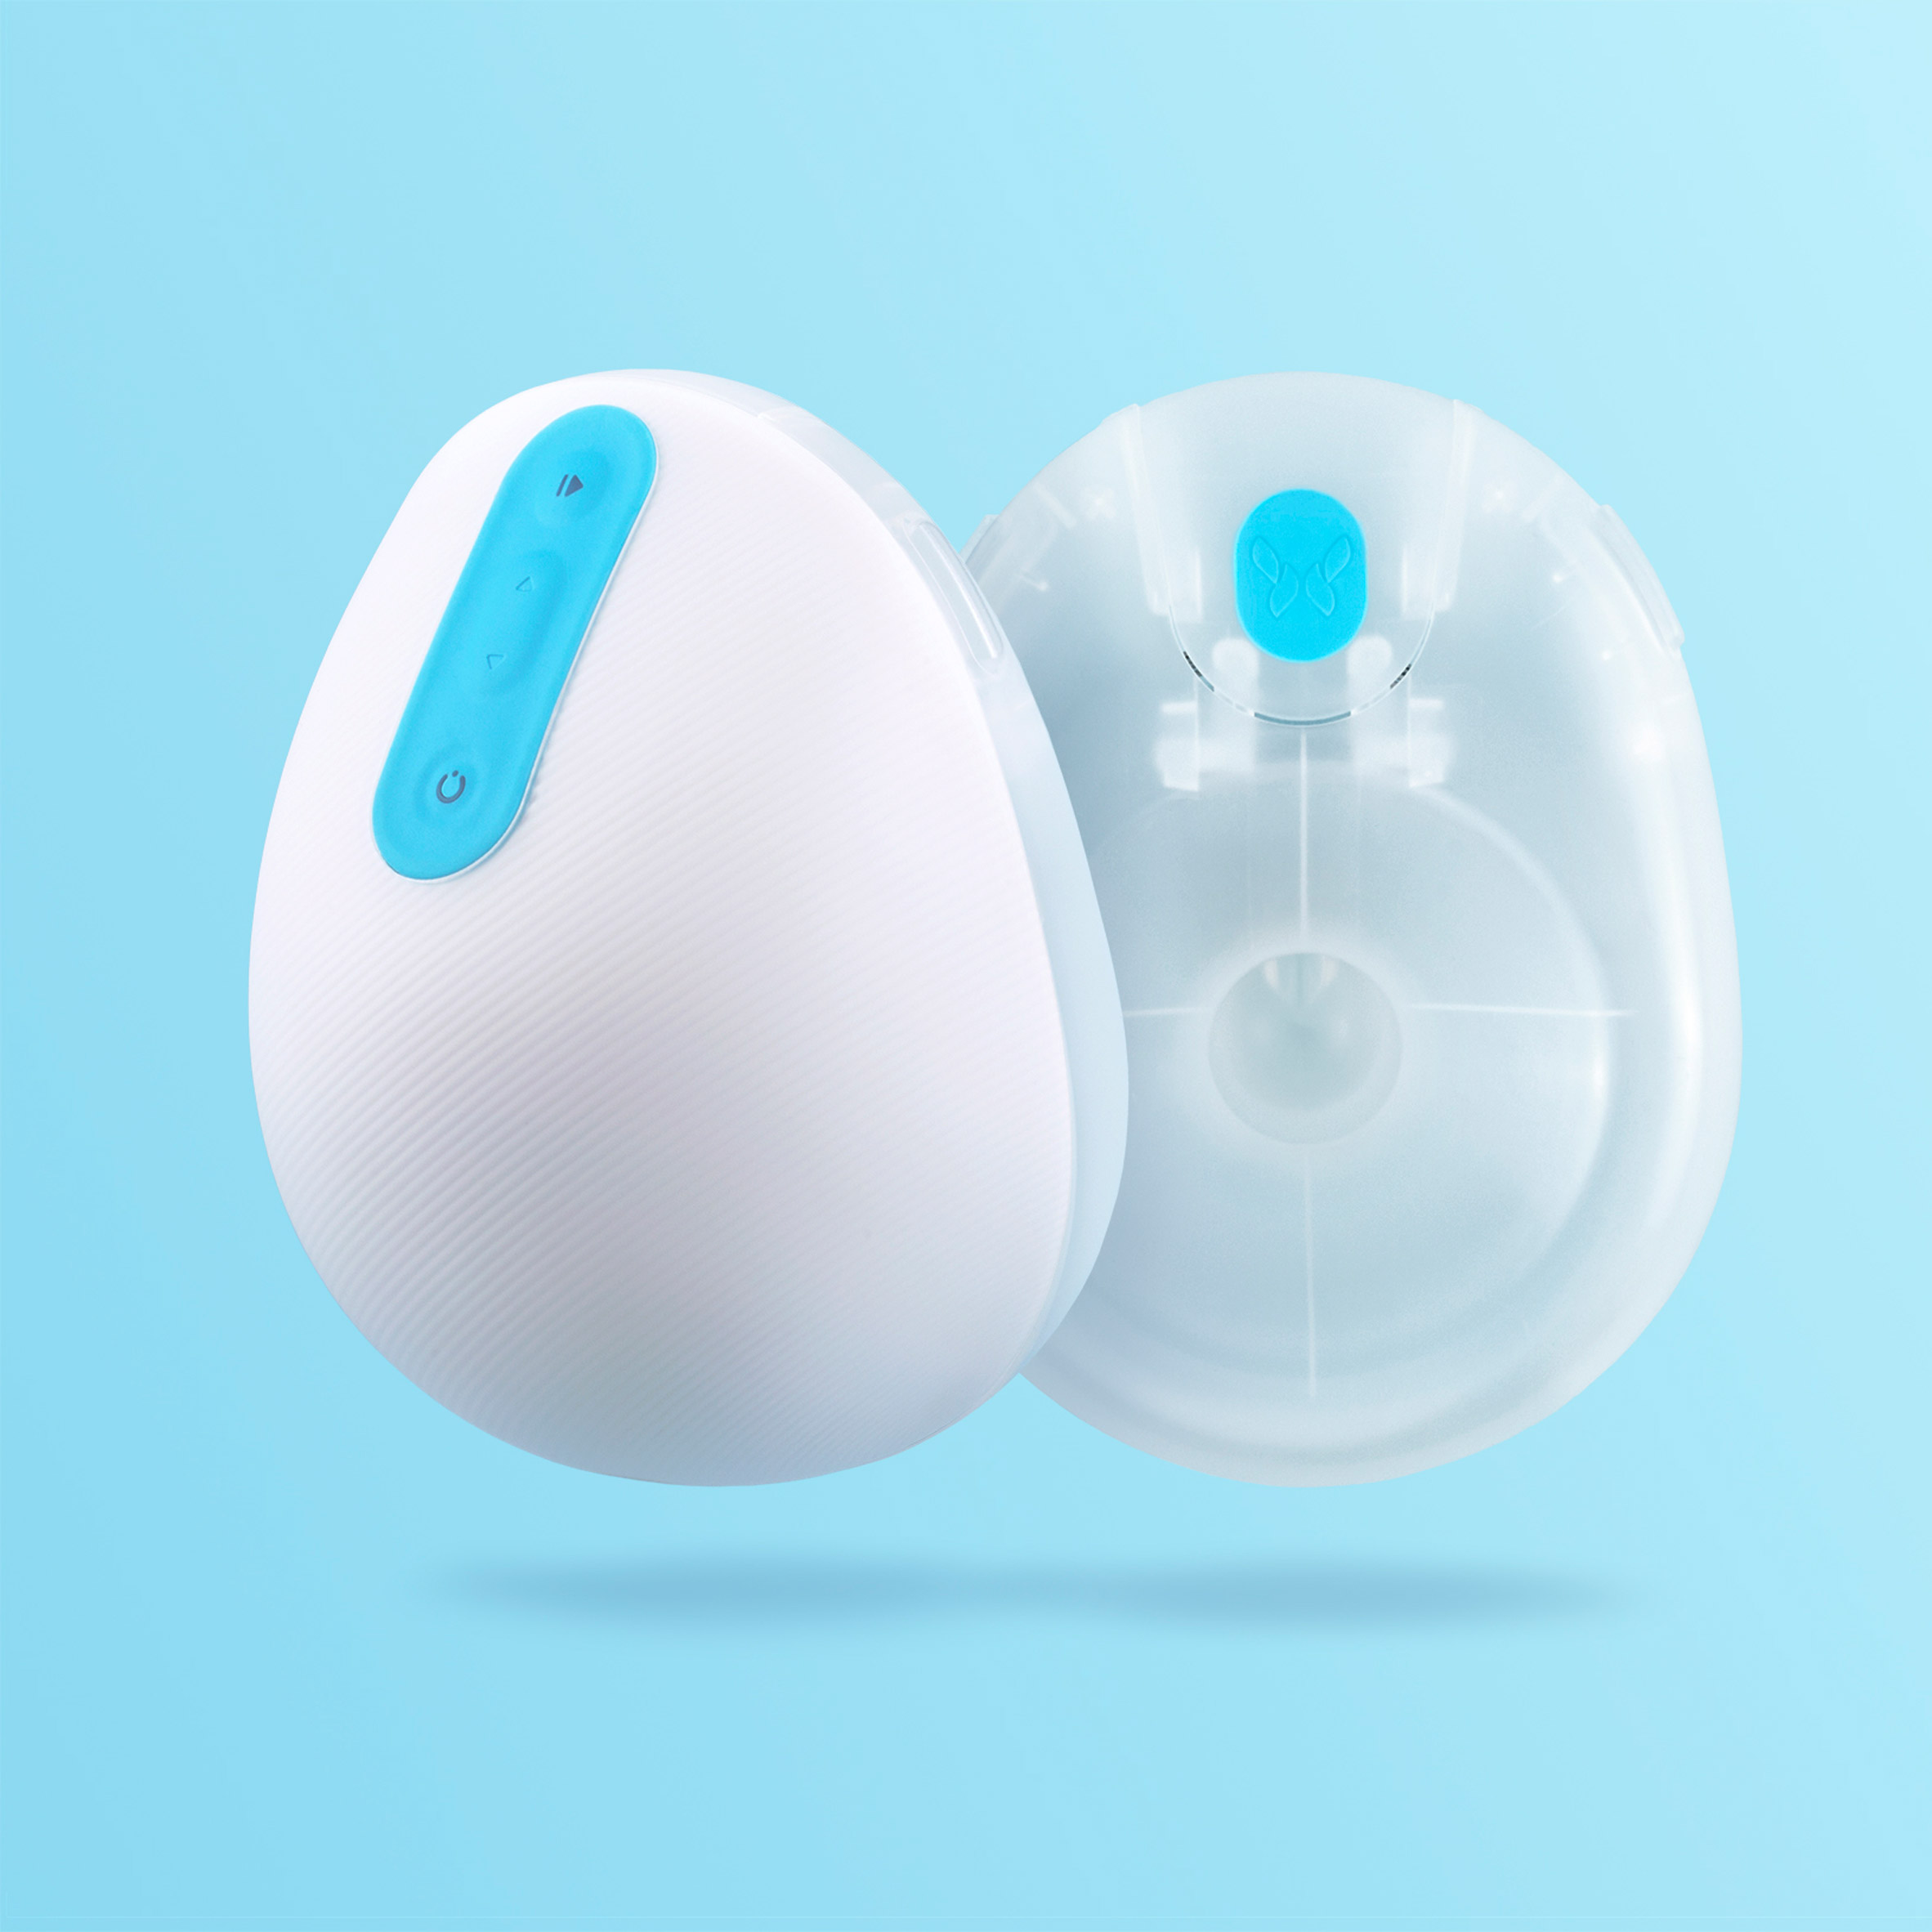 Willow's wireless breast pump allows women to express milk on the go